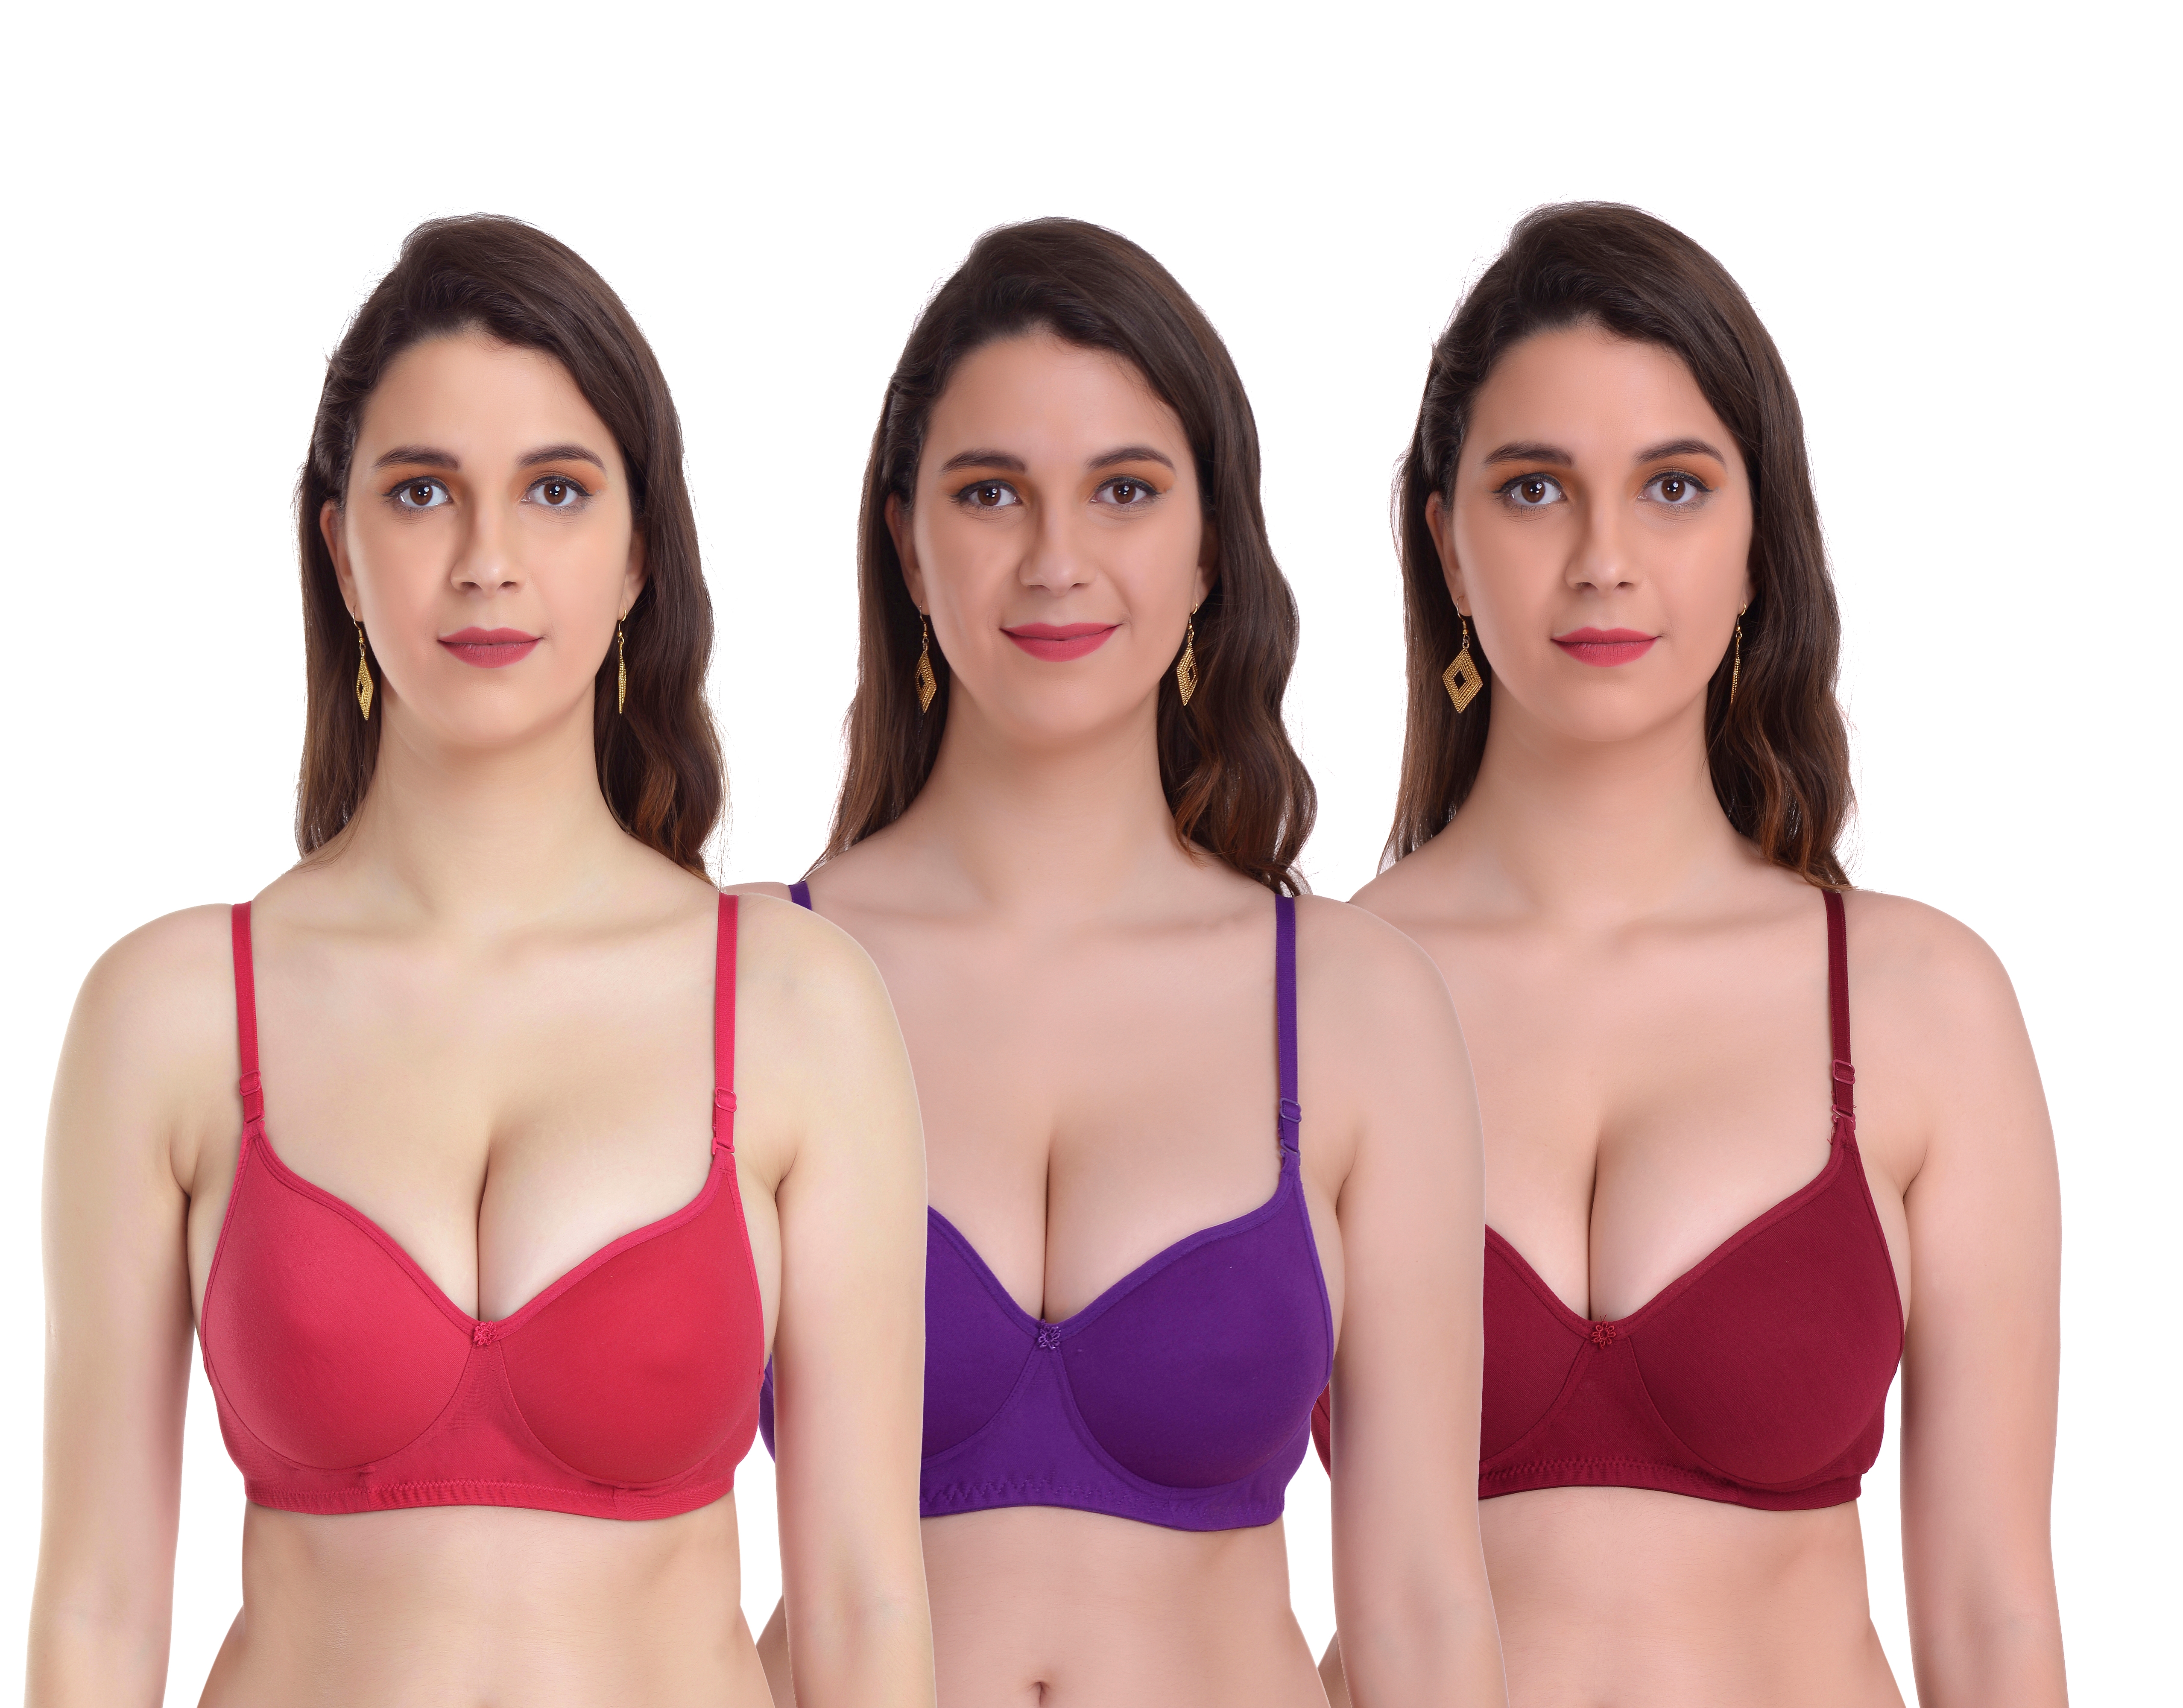 Mynte Women's Cotton Rich Lightly Padded Non-Wired Full Cup Regular Bra (Pack of 3) (Pink/Purple/Maroon,30) (MY-CPPB-7HRVM-30)